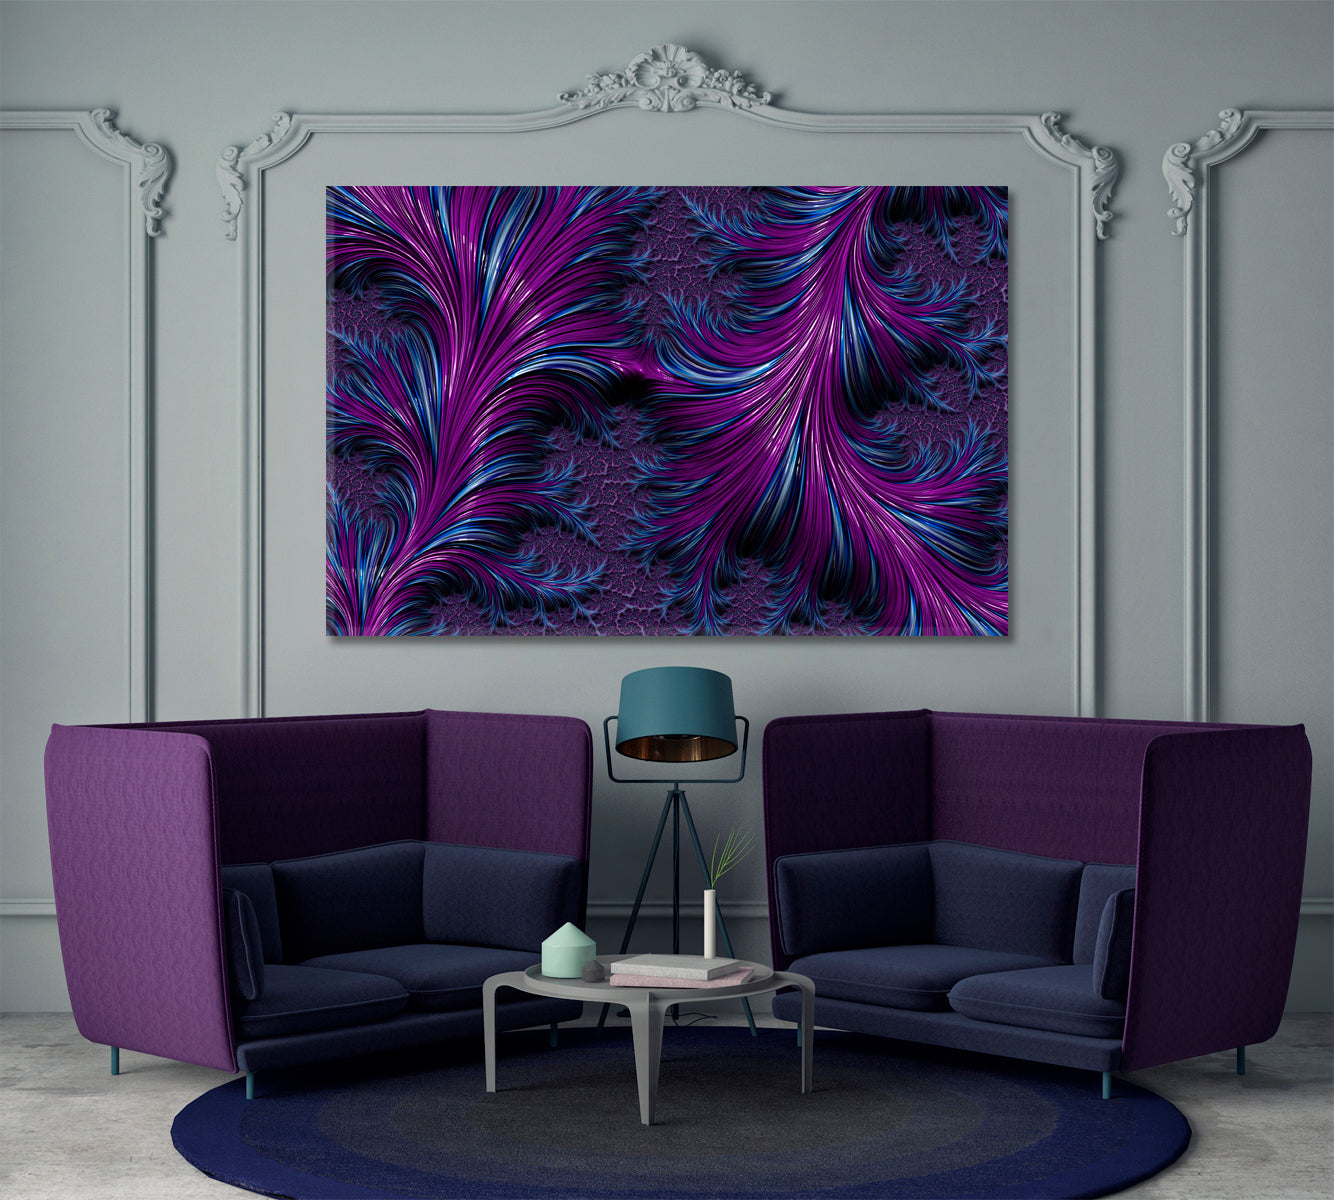 Abstract Fractal Spiral Swirls Purple and Navy Blue Feathers Canvas Print Contemporary Art Artesty   